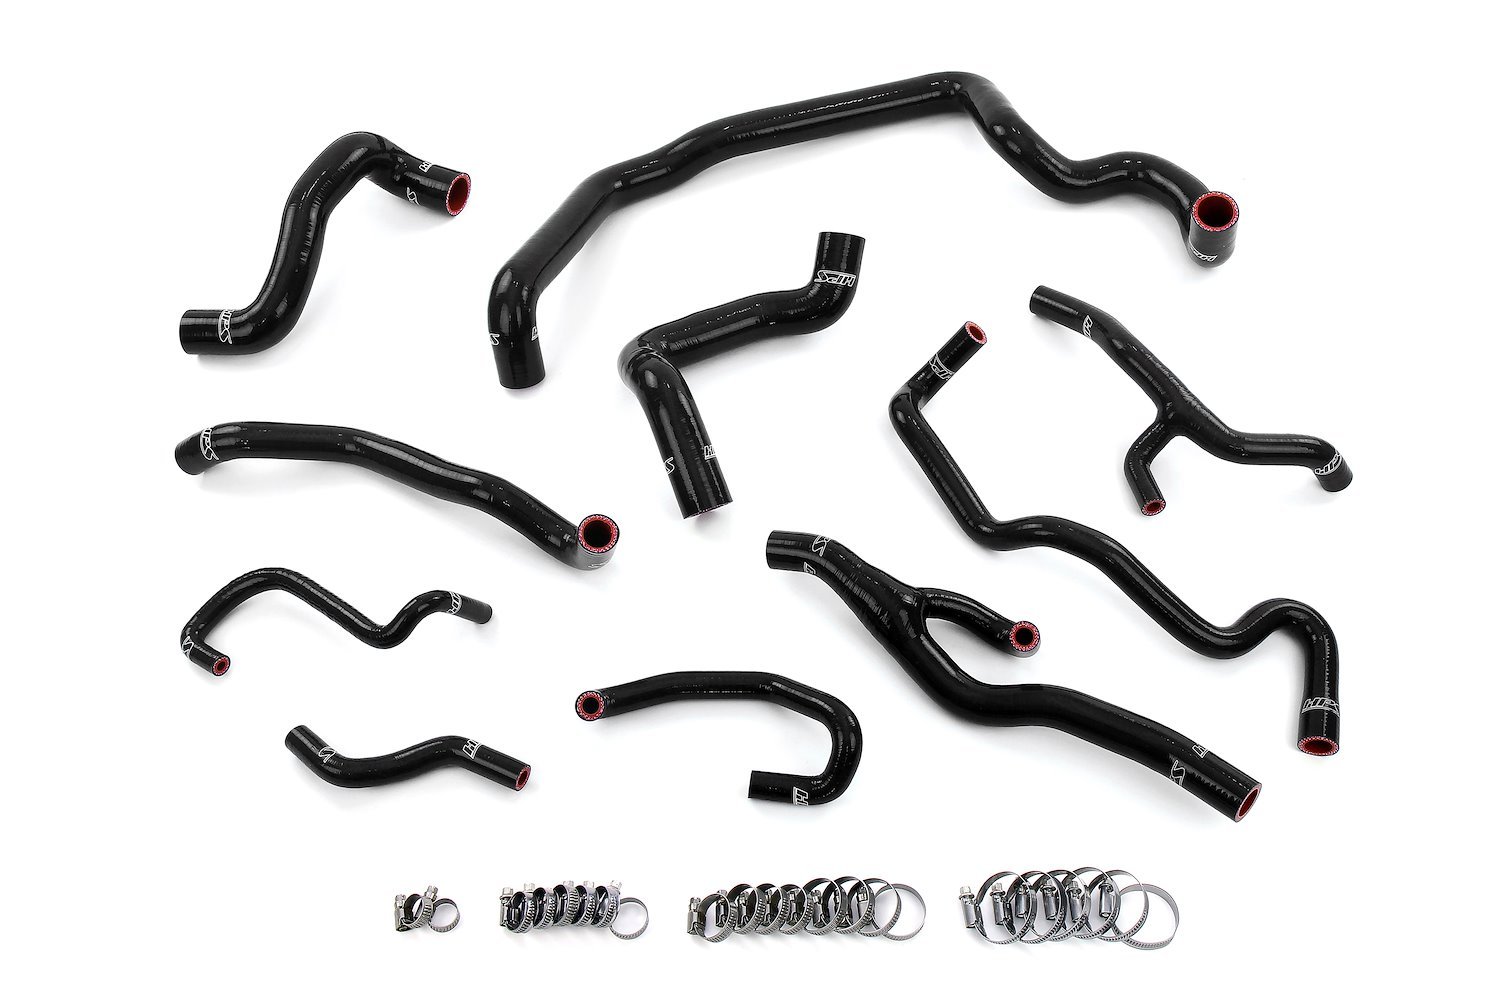 57-1998-BLK Coolant Hose Kit, 3-Ply Reinforced Silicone Hoses, For Radiator, Heater, Water Pump, Expansion Tank